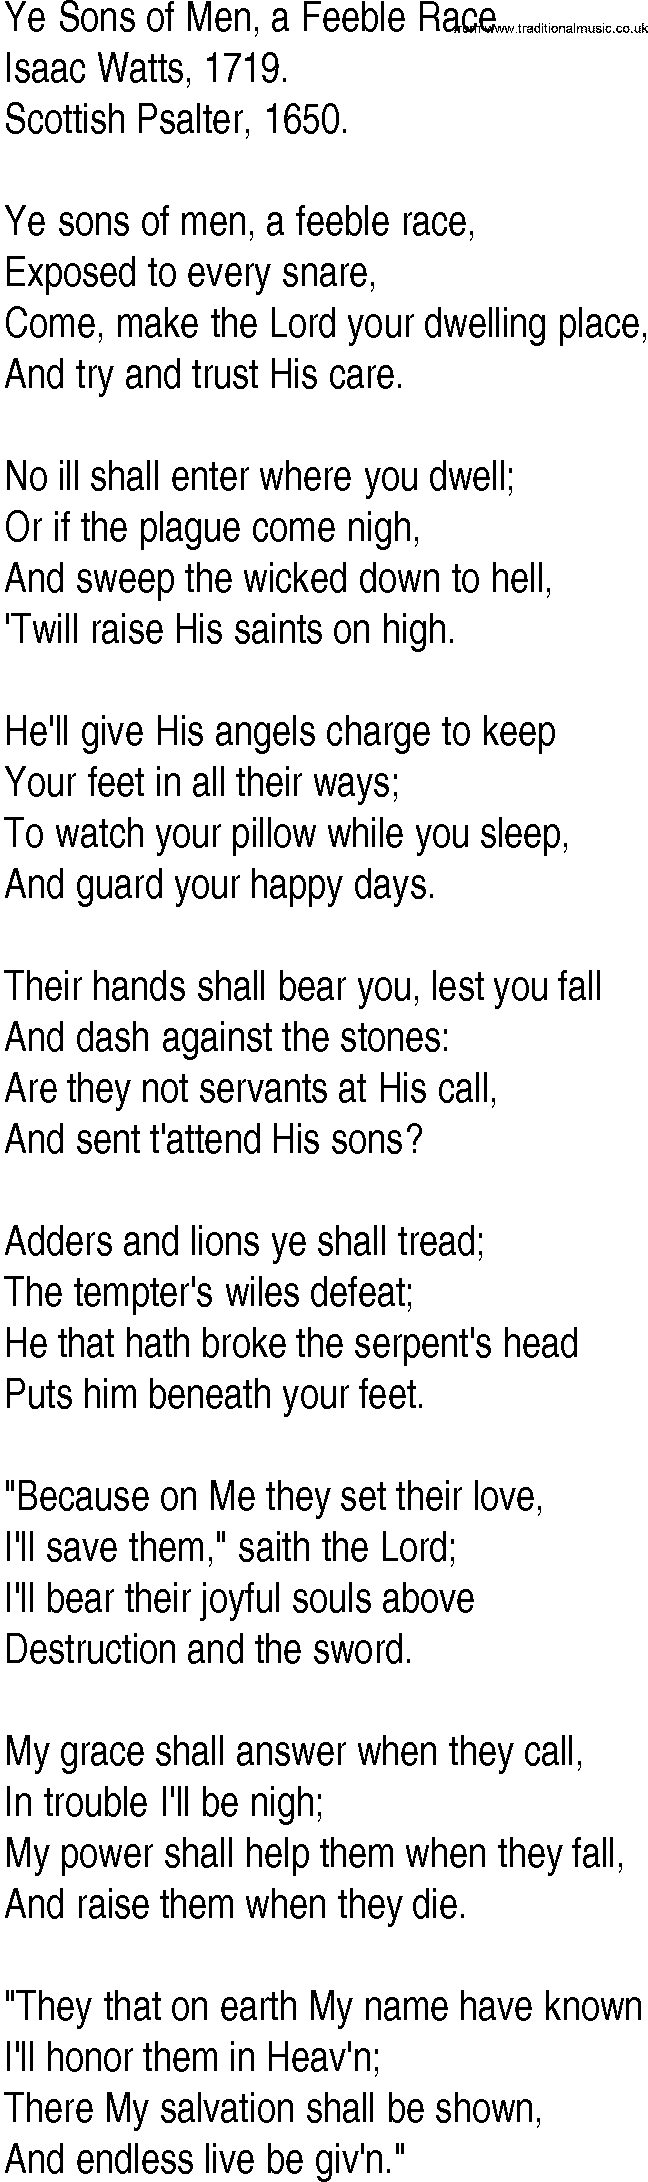 Hymn and Gospel Song: Ye Sons of Men, a Feeble Race by Isaac Watts lyrics